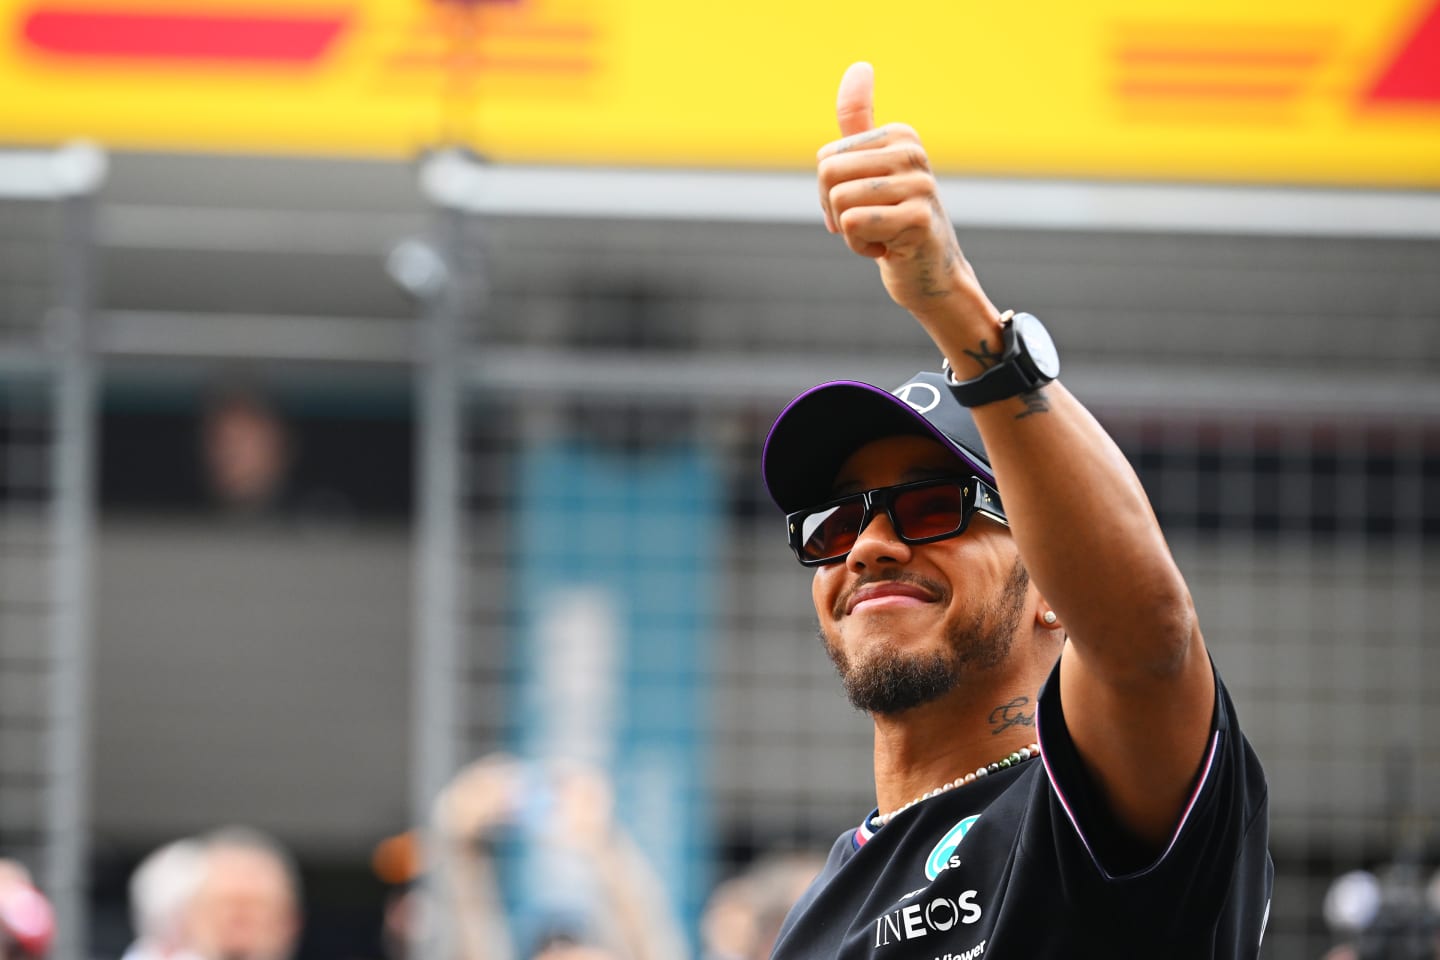 SHANGHAI, CHINA - APRIL 21: Lewis Hamilton of Great Britain and Mercedes waves to the crowd on the